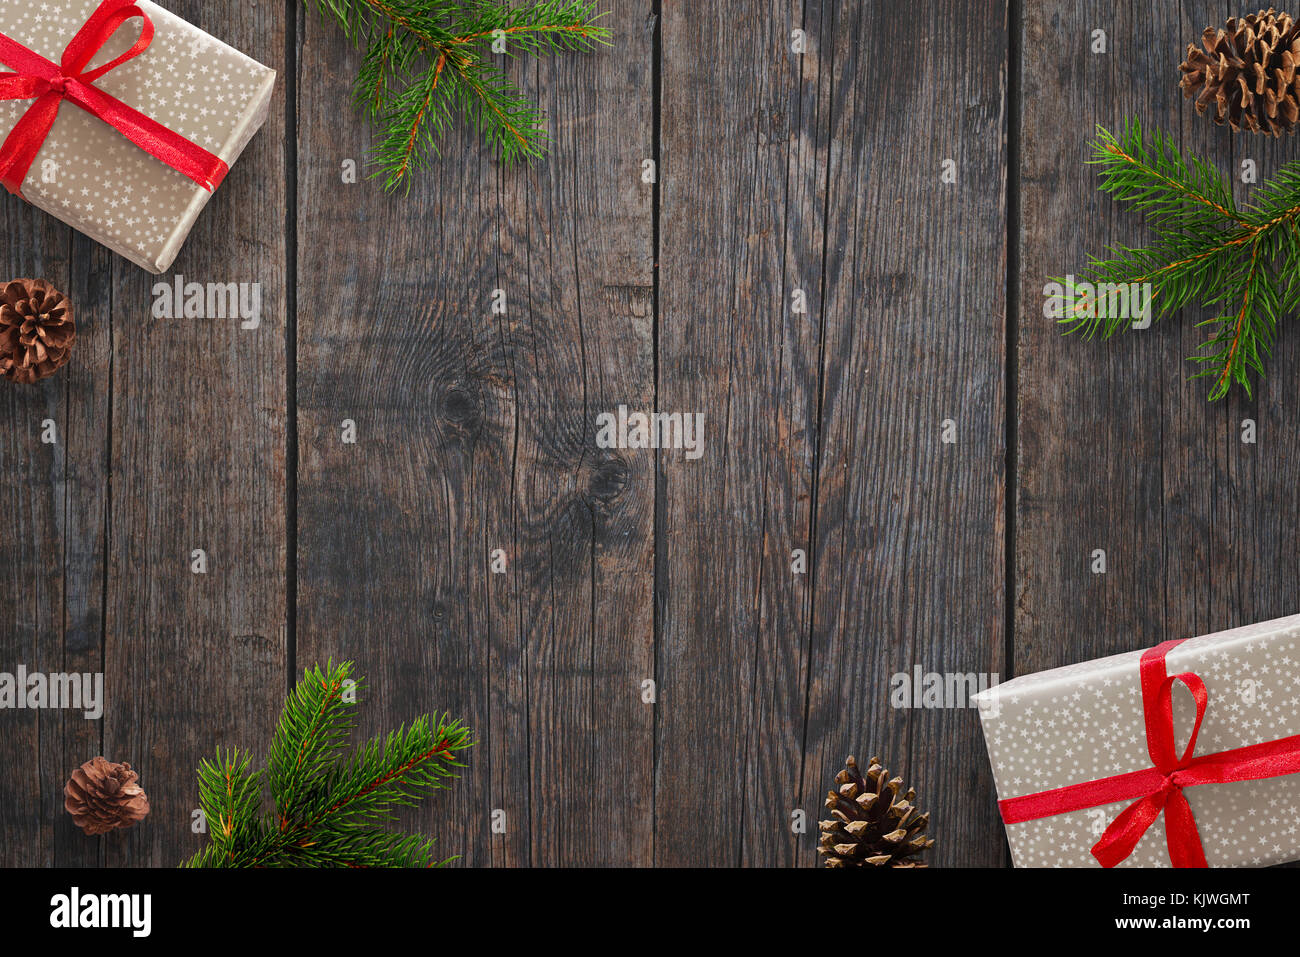 Christmas background with gifts, fir branches and pinecones over black wooden table. Top view. Stock Photo